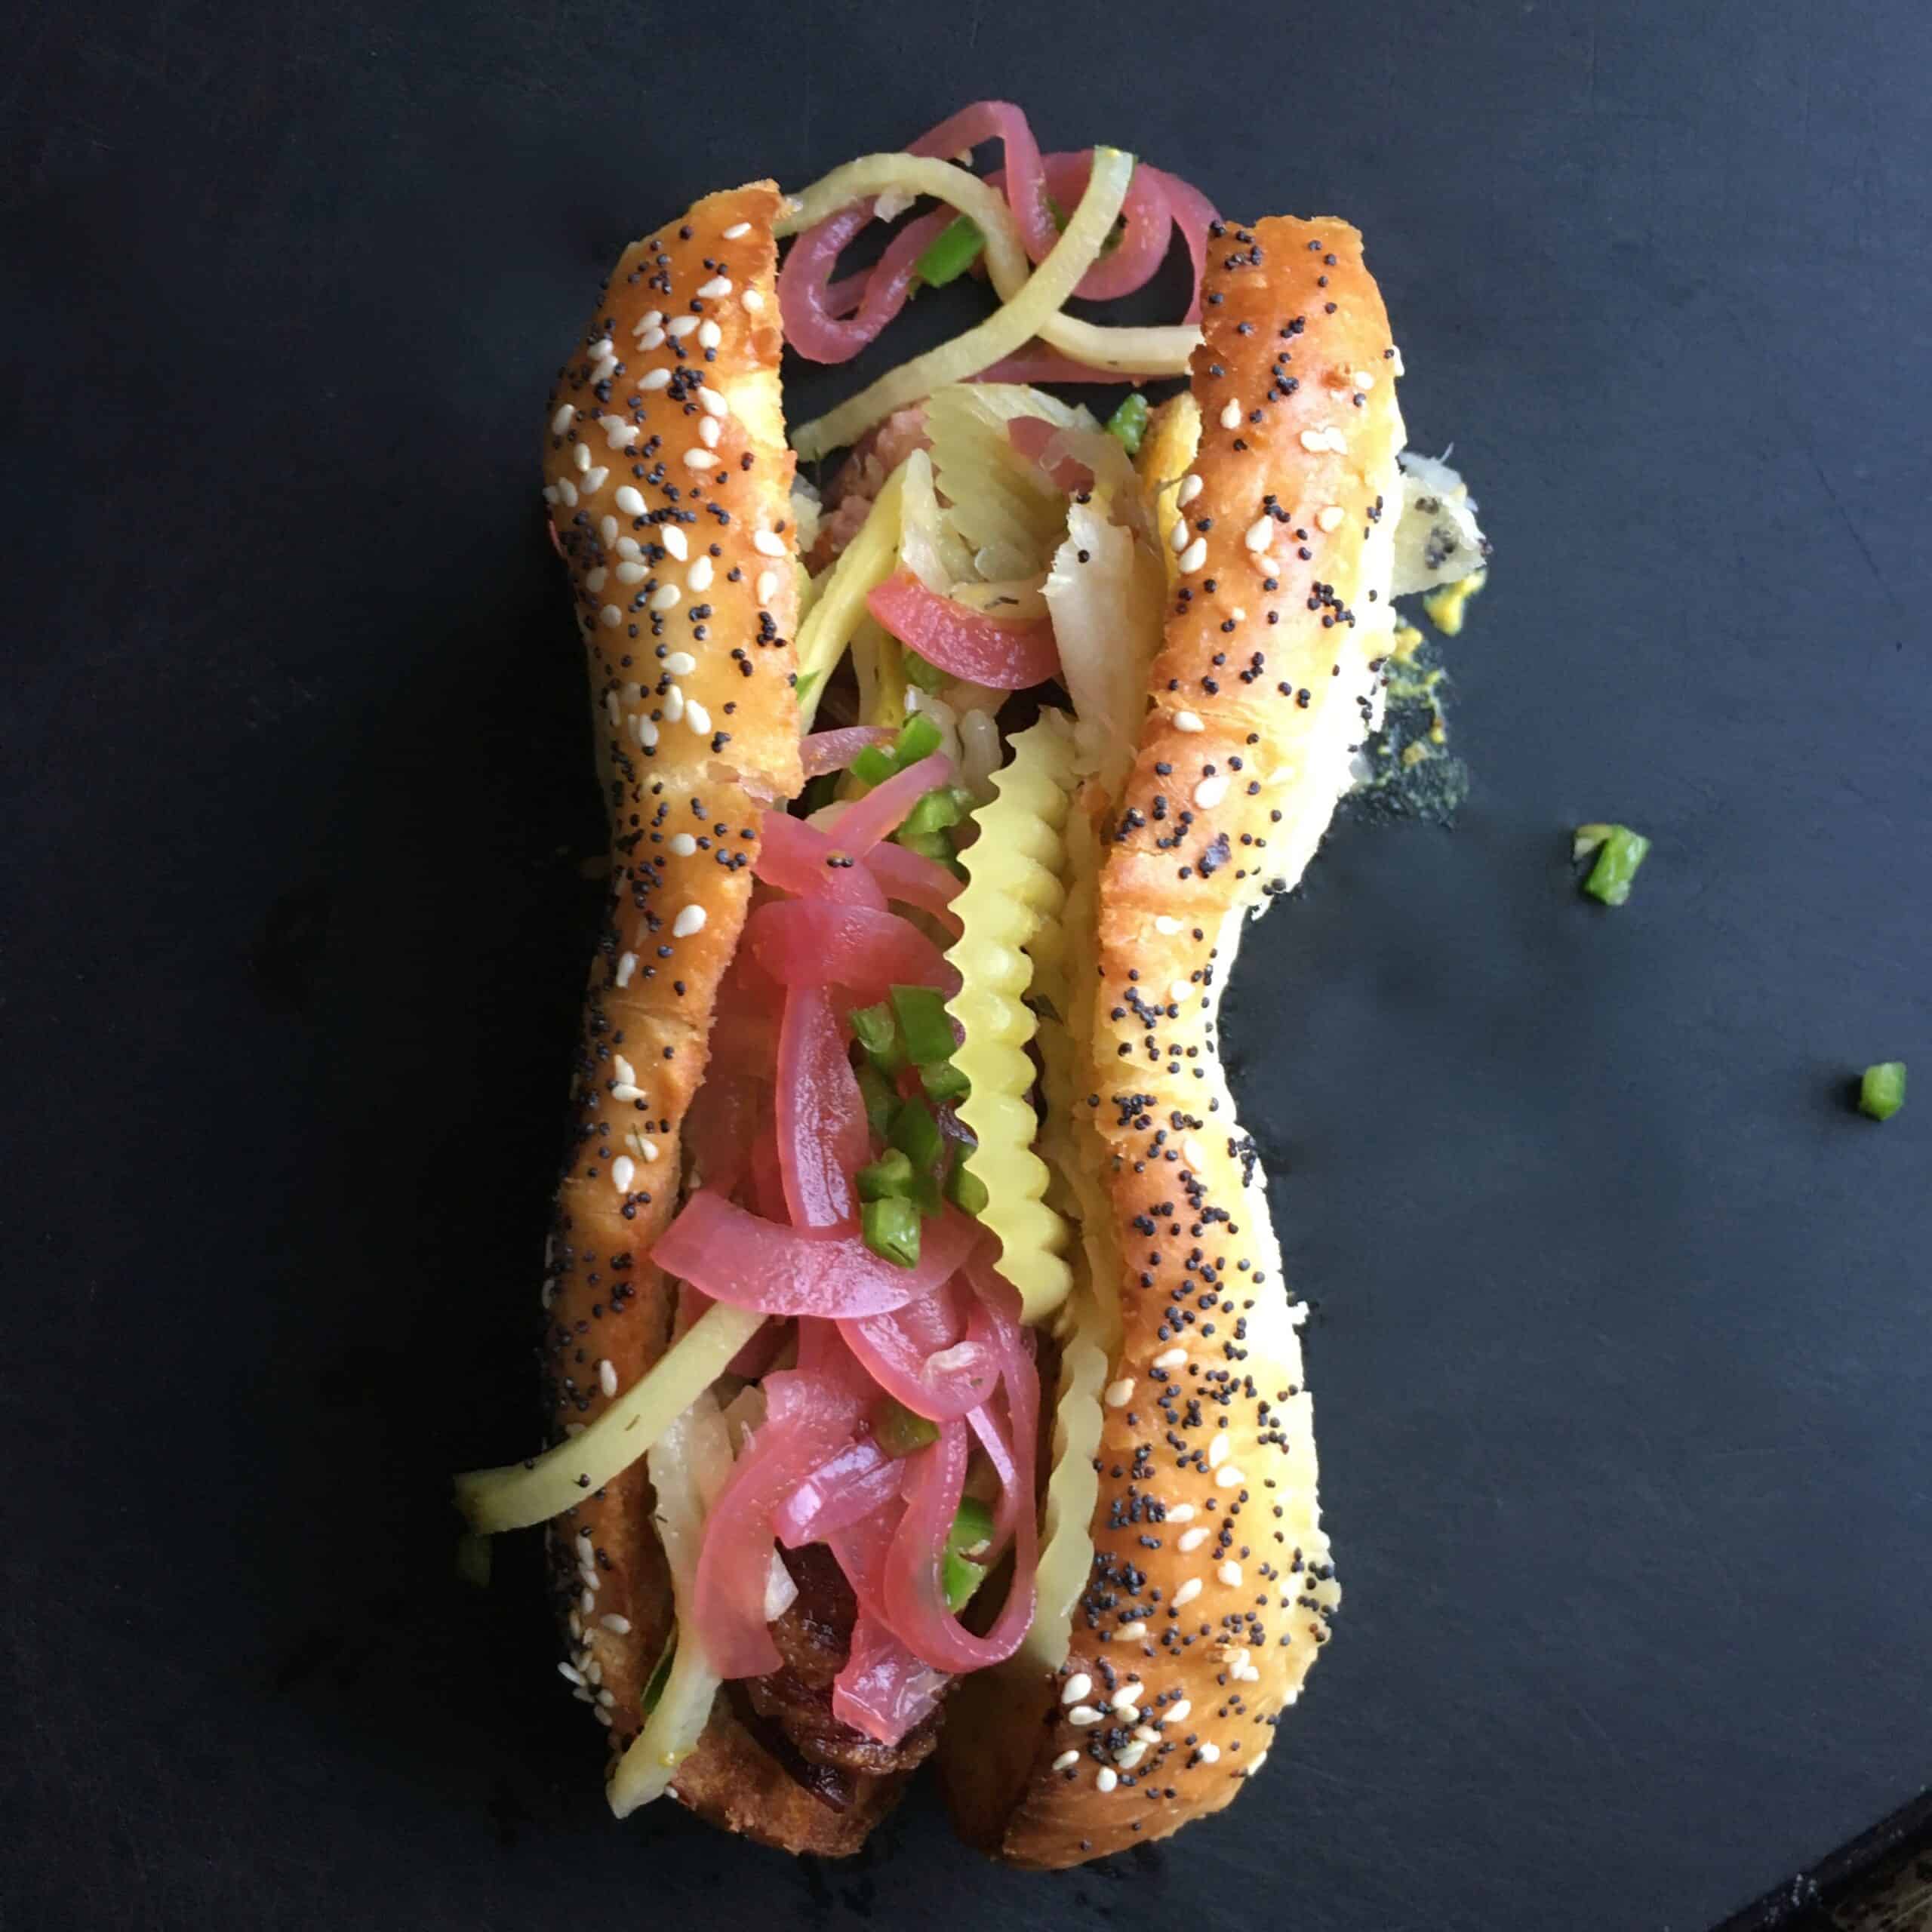 bacon wrapped and shallow friedall beef hot dog with homemade pickled smokey red onions, small diced fresh jalapeno, sauer kraut and dill pickled green tomato slices on a homemade sesame poppyseed hot dog bun